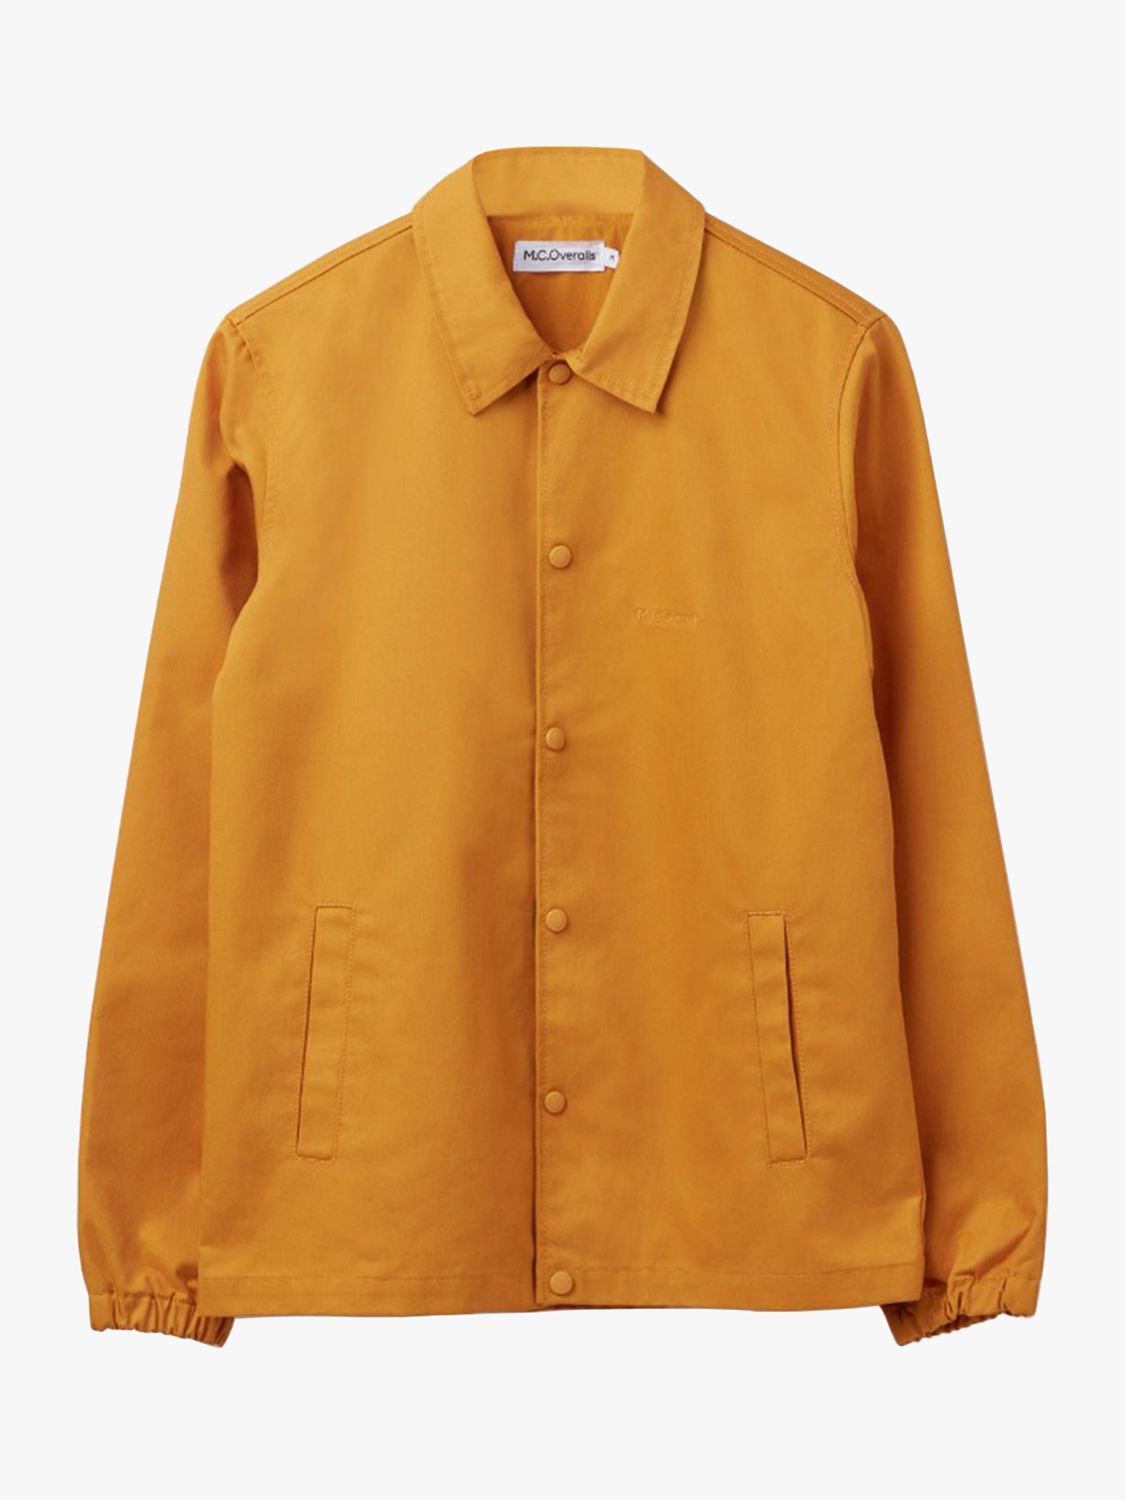 Buy M.C.Overalls Fitted Coach Jacket Online at johnlewis.com